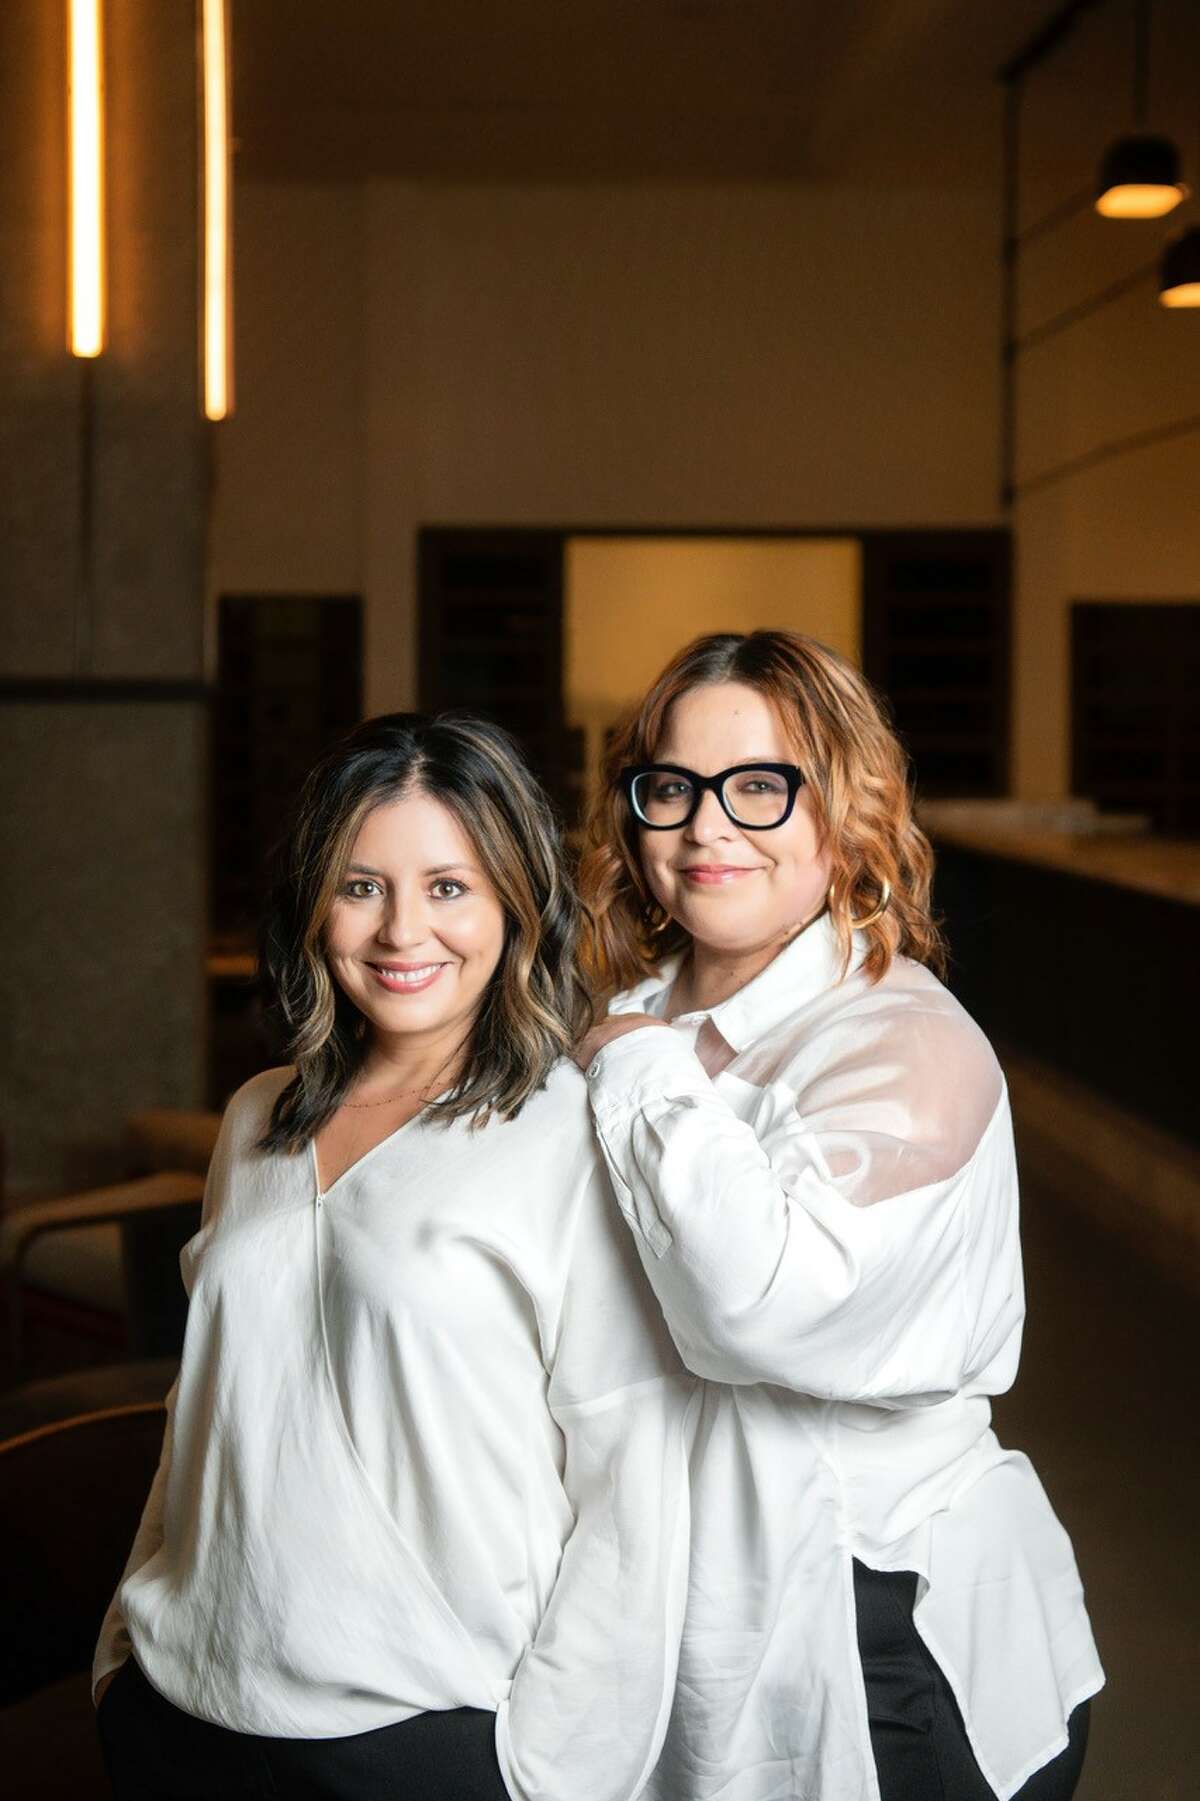 Stephanie Valencia (left) and Jess Morales Rocketto (right) are the co-founders of Latino Media Network.